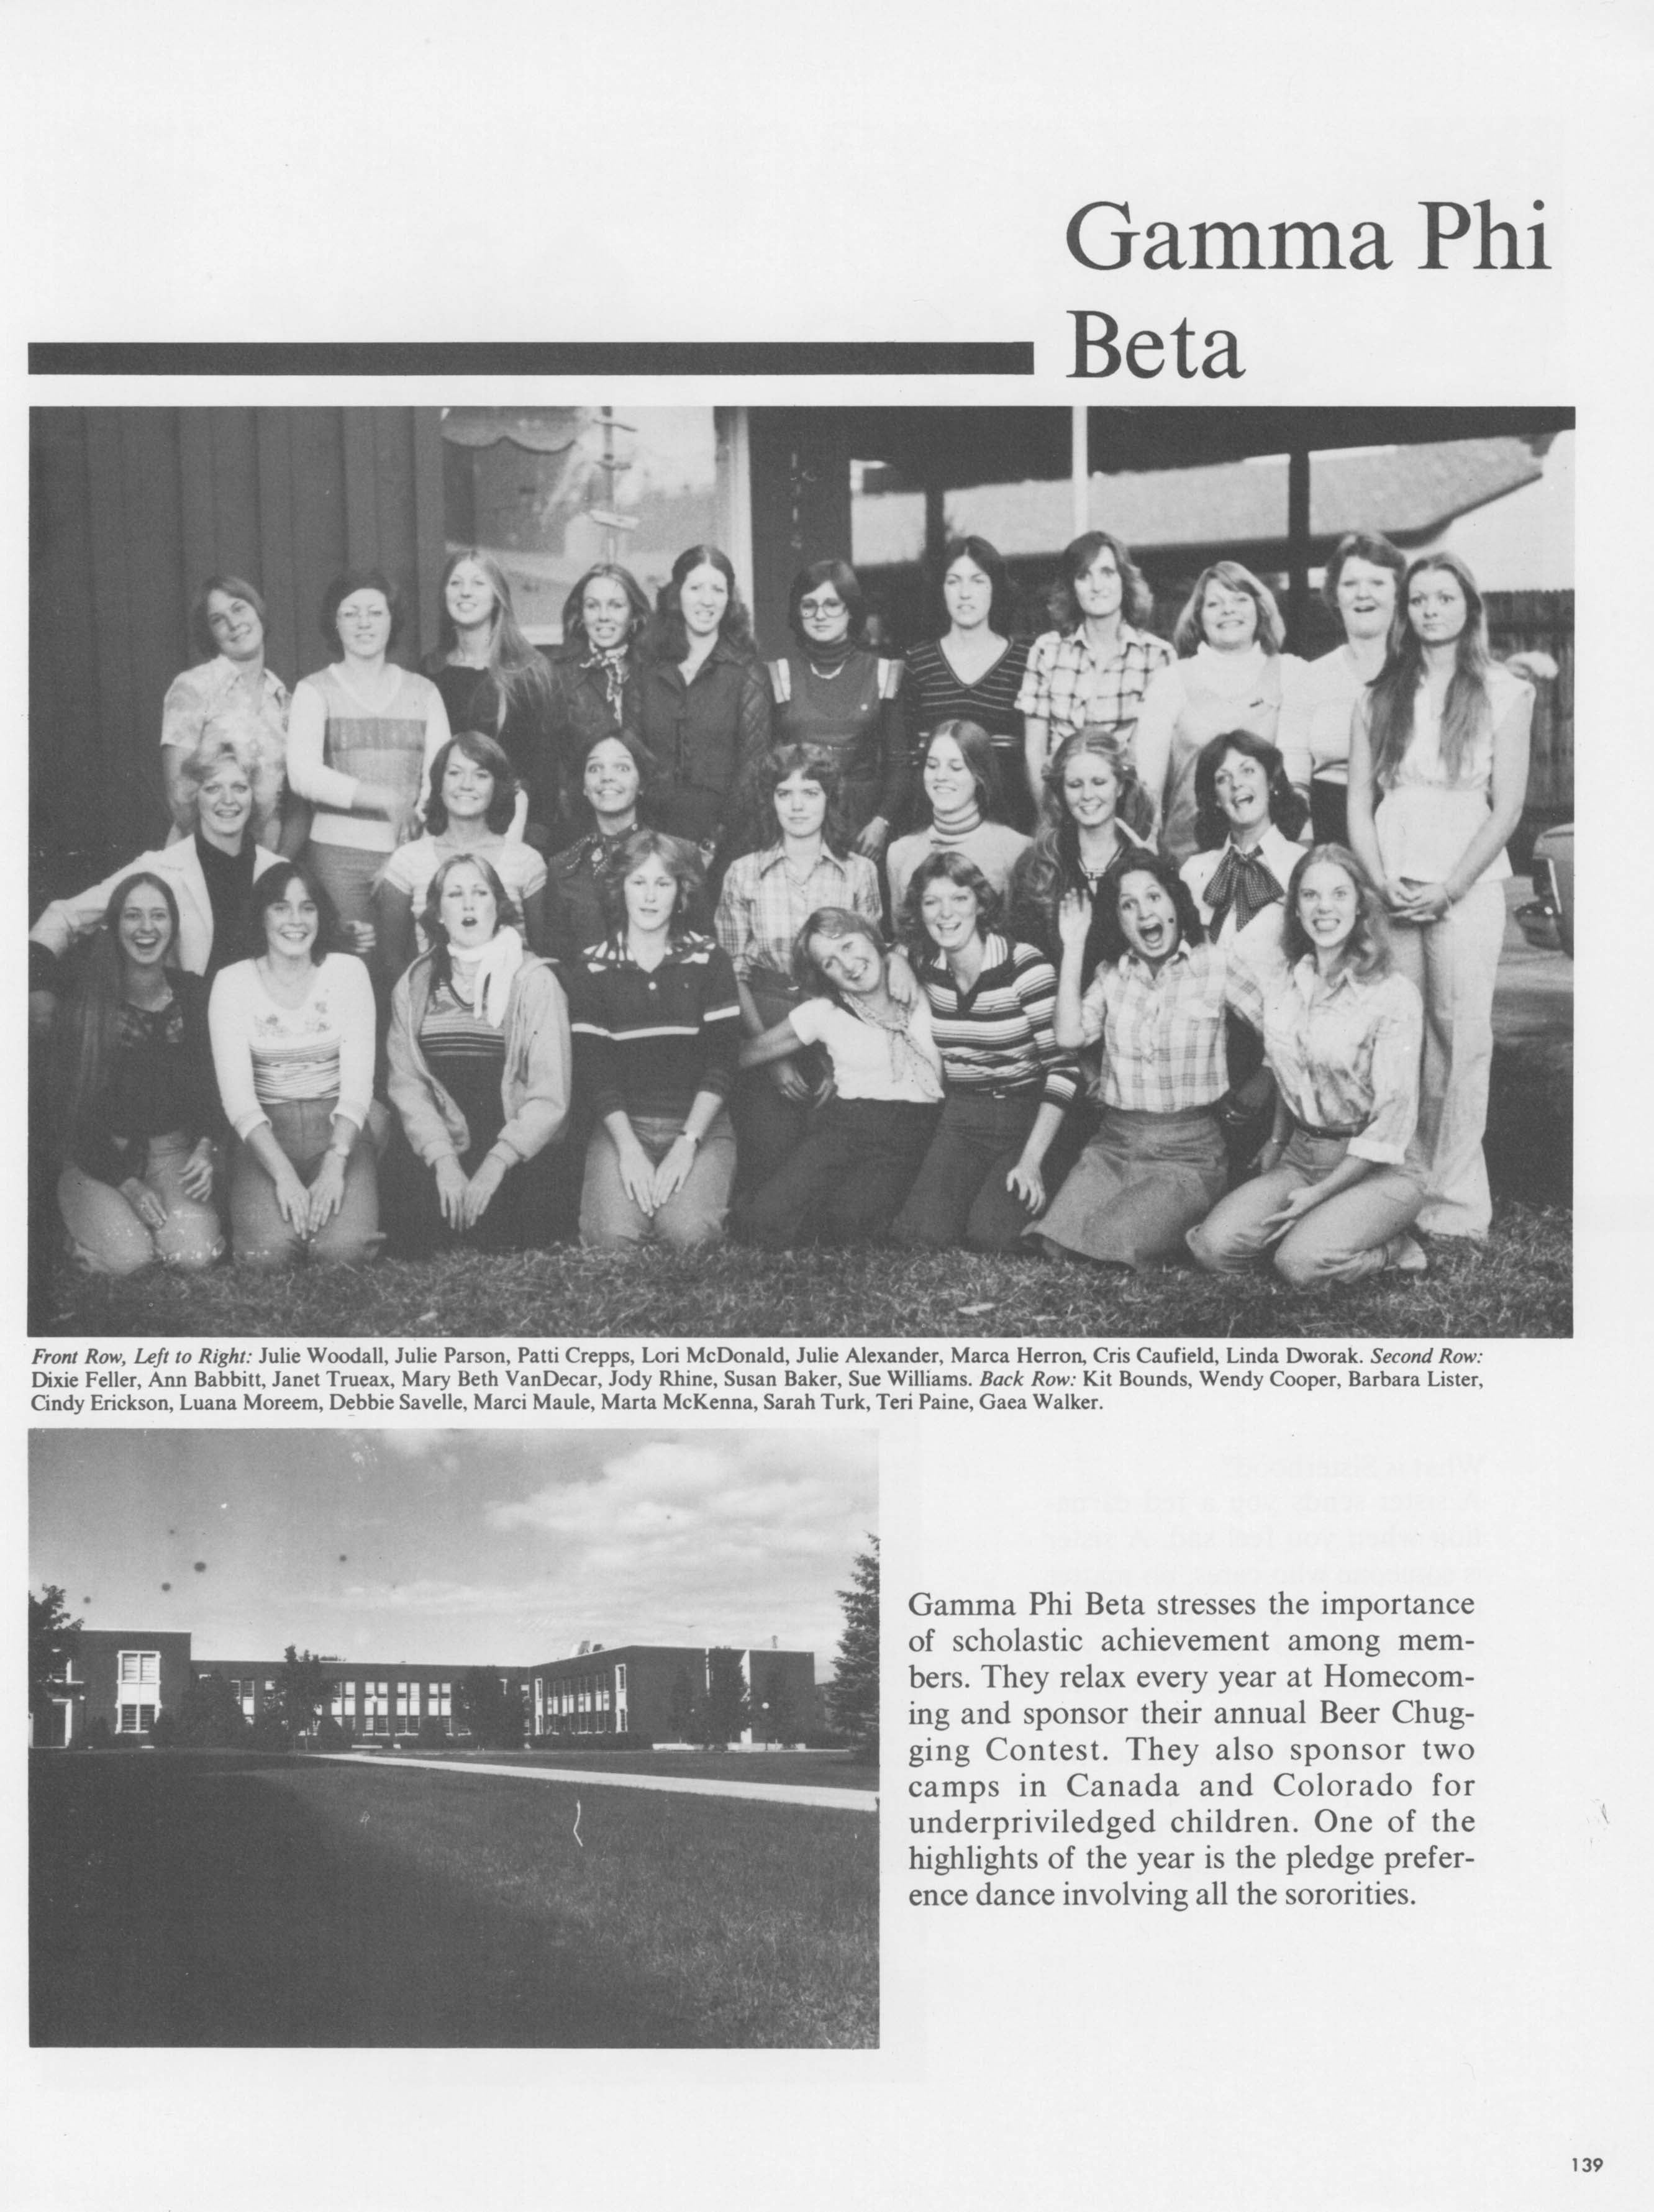 Page from yearbook showing a Gamma Phi Beta group photo and the exterior of a building on campus